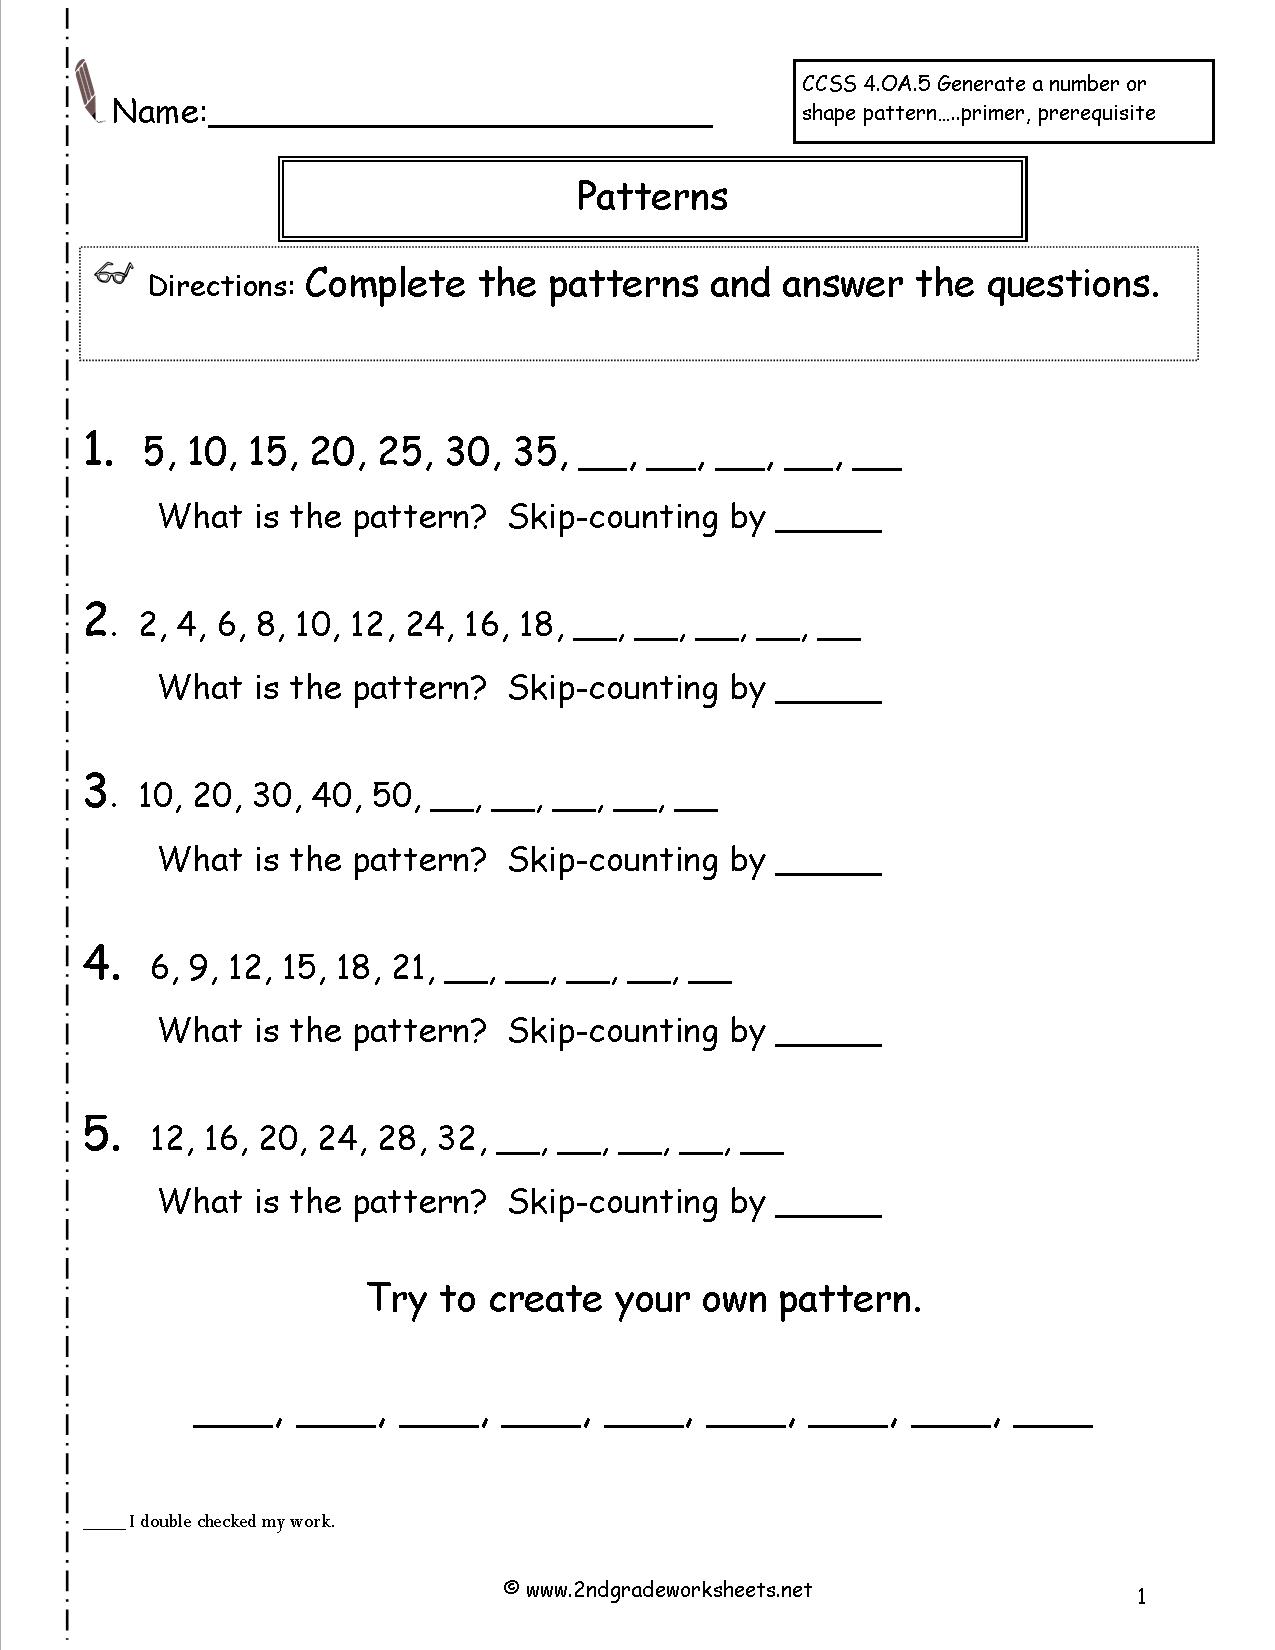 14 Best Images Of Counting By 5 Worksheets Counting By 5 Worksheets Printable Numbers 1 To 5